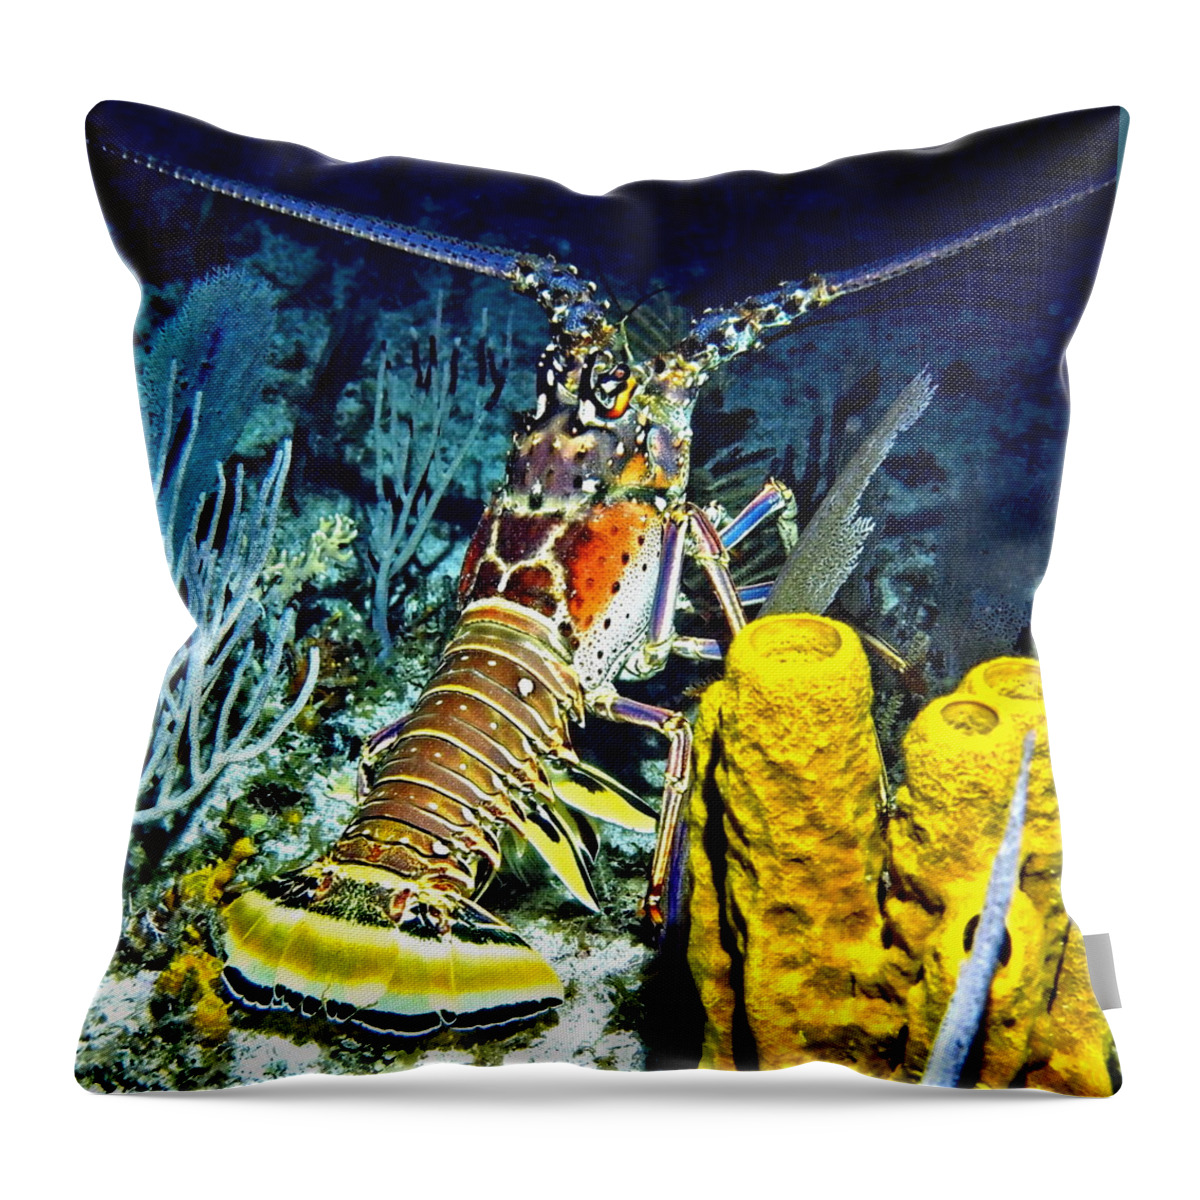 Ocean Throw Pillow featuring the photograph Caribbean Reef Lobster by Amy McDaniel